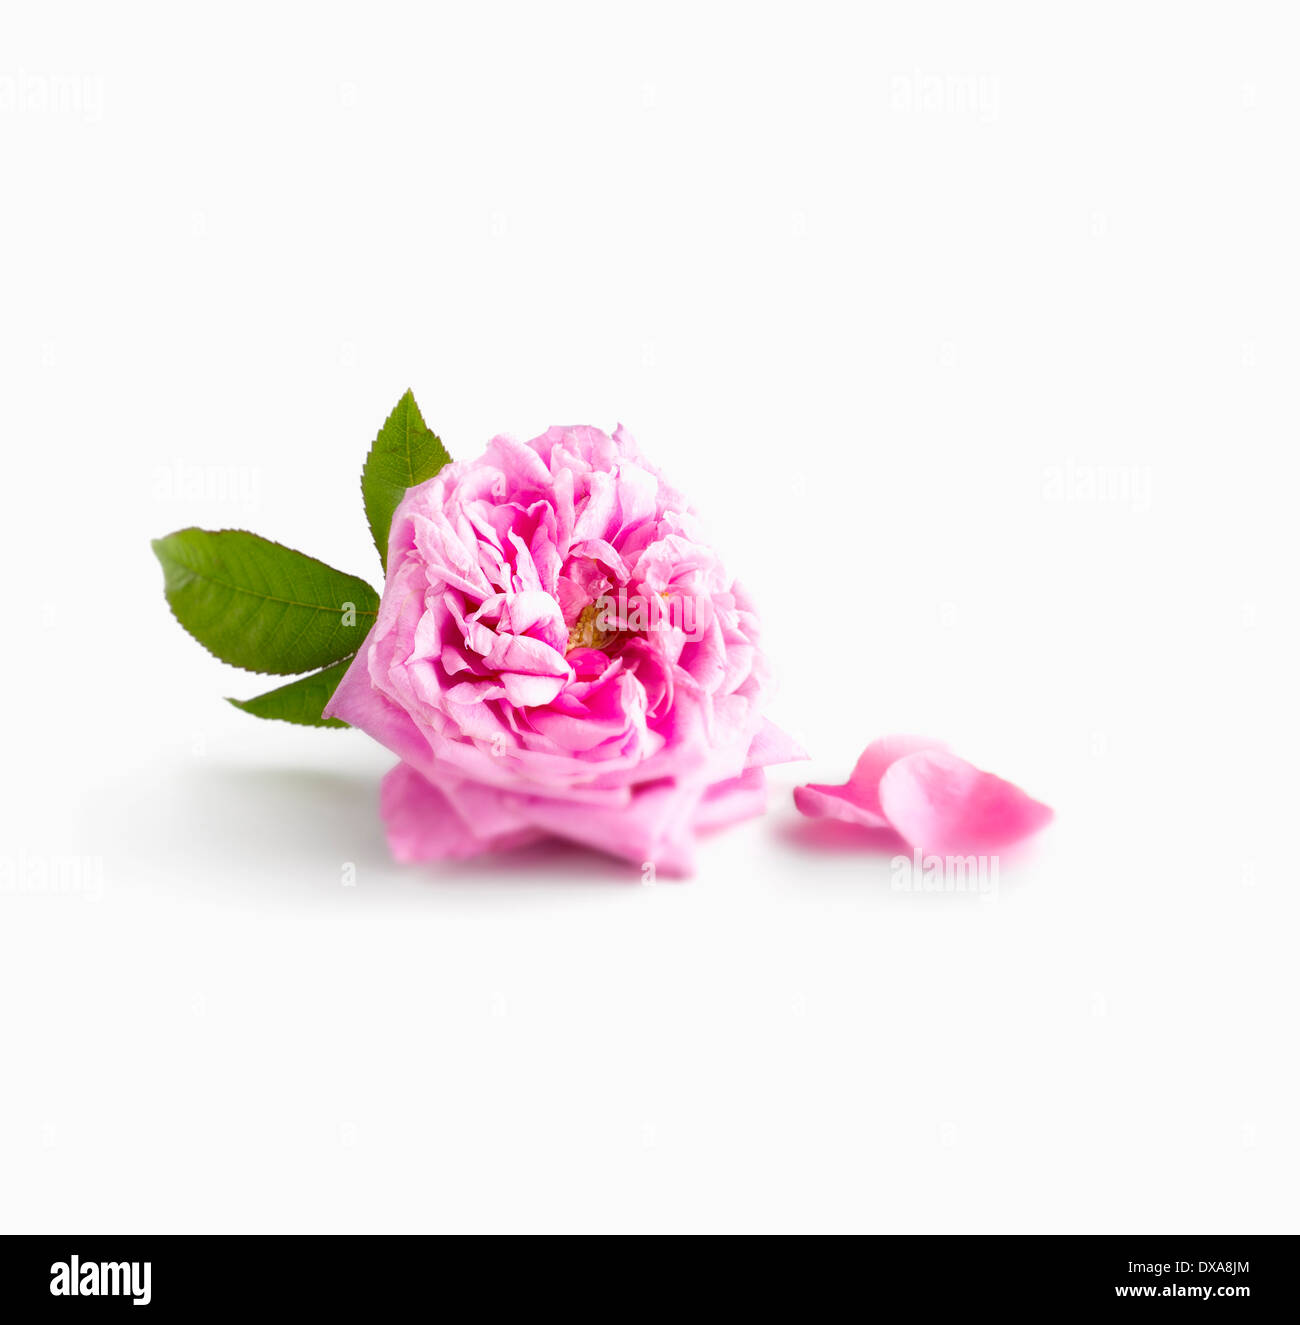 Damask rose, Rosa damascena, with leaves and loose petals, with shadow and some soft focus. Stock Photo